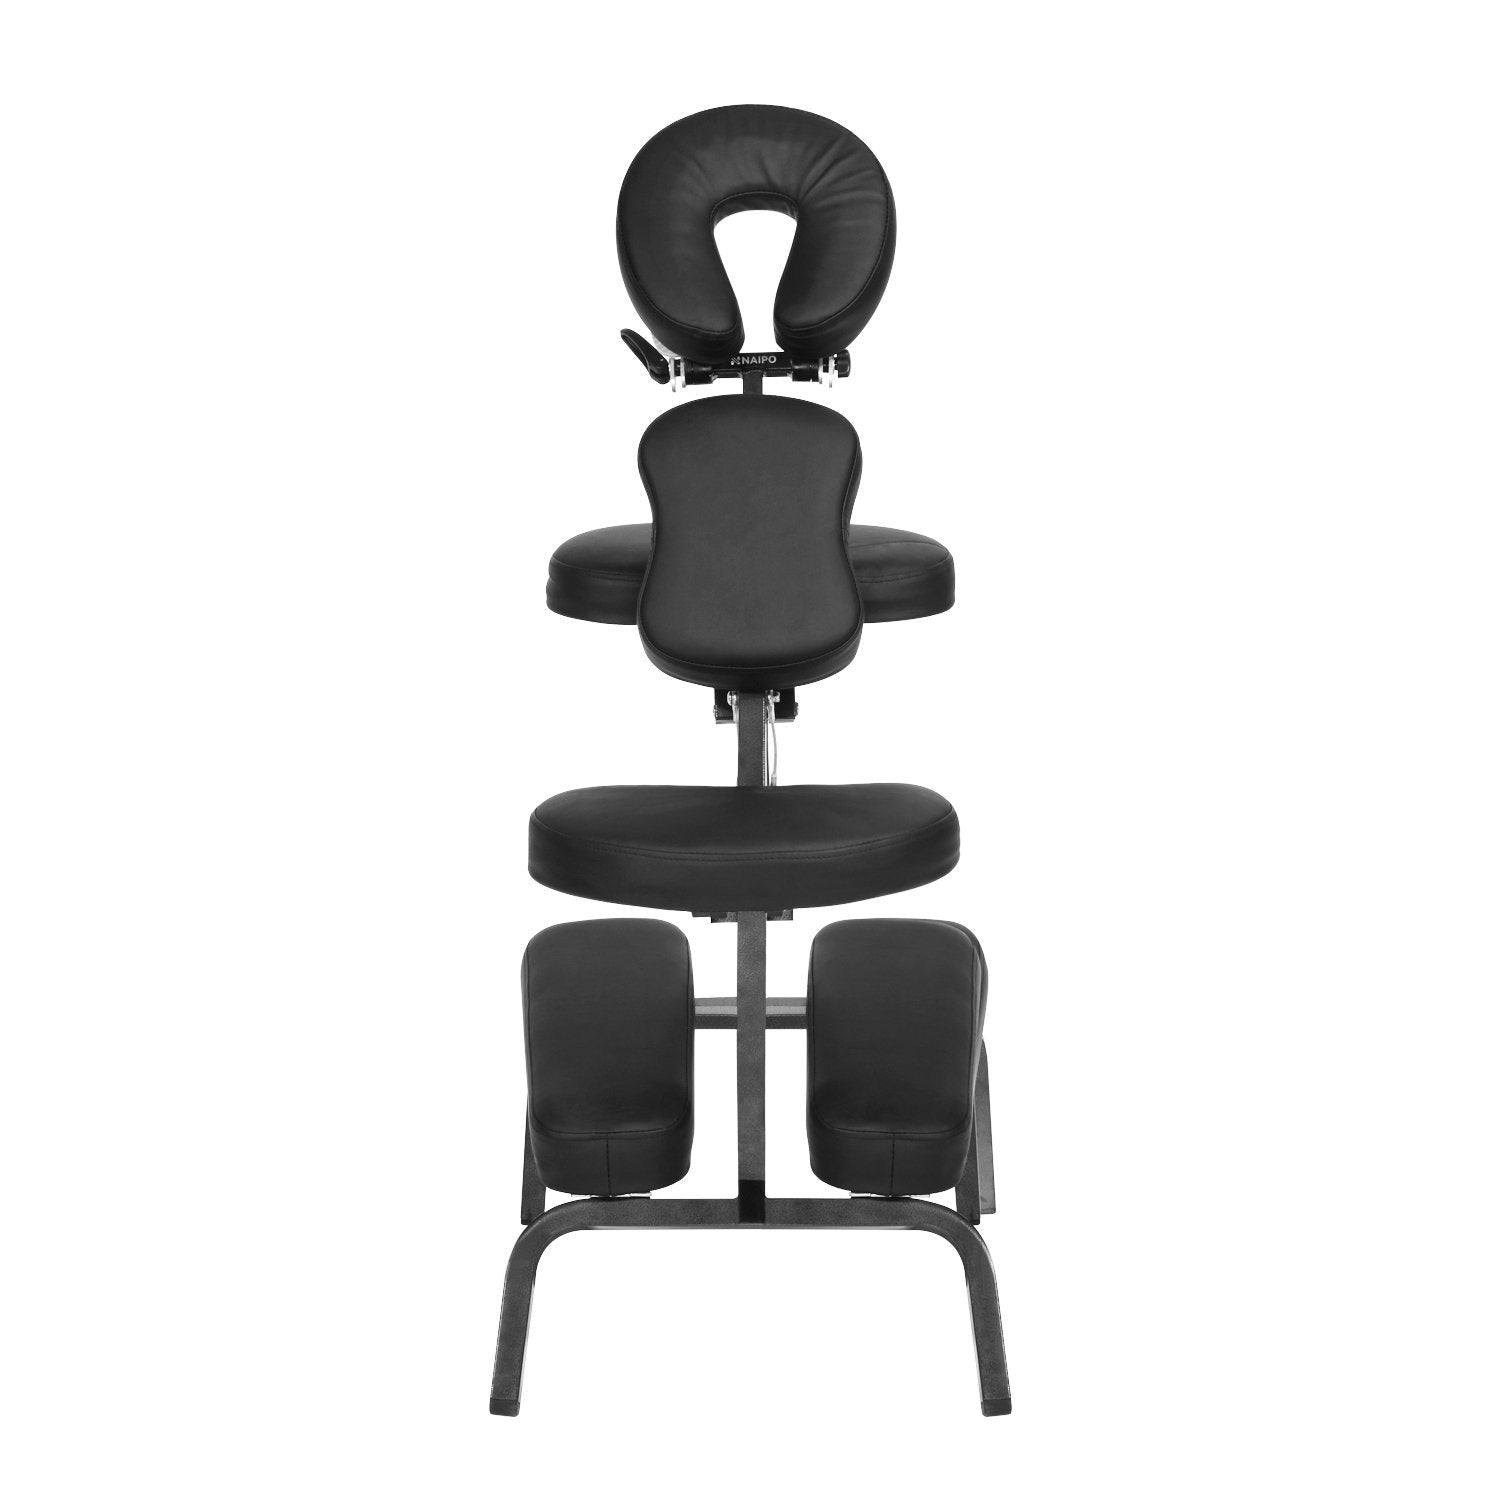 Load image into Gallery viewer, Naipo Portable and Foldable Massage Chair - NAIPO
